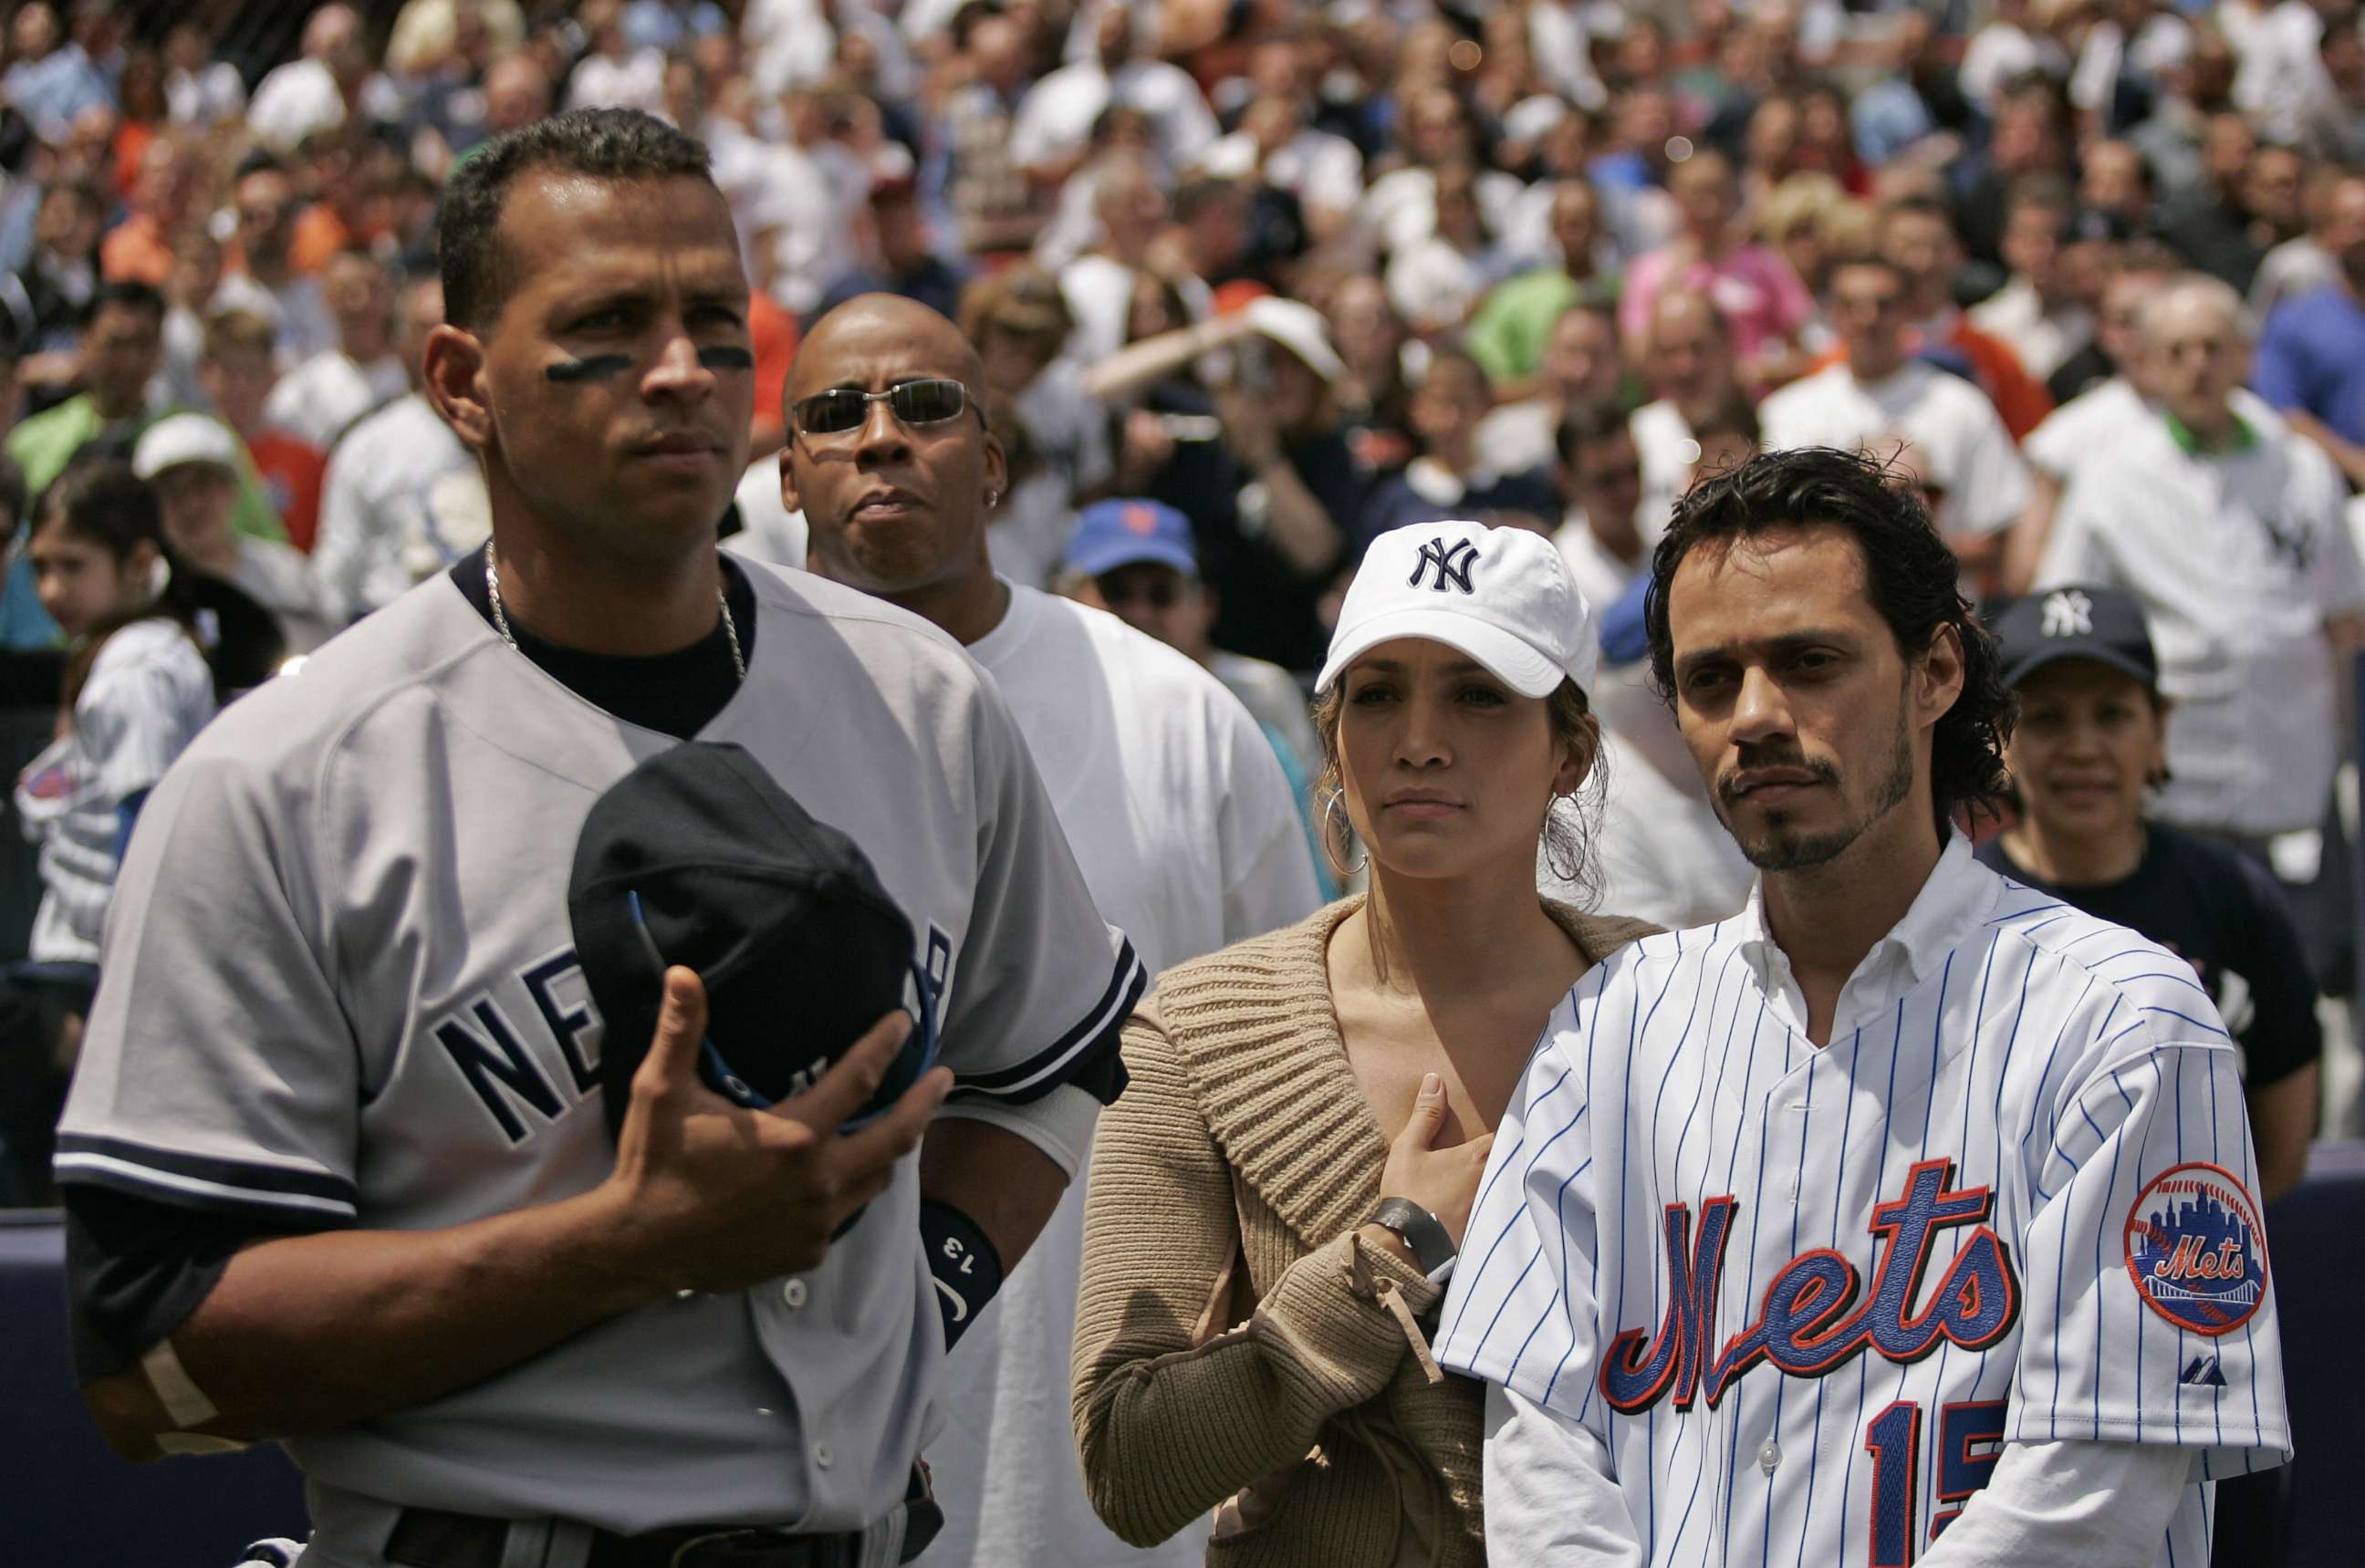 Jennifer Lopez and Alex Rodriguez Bring Their Kids to Yankees Game